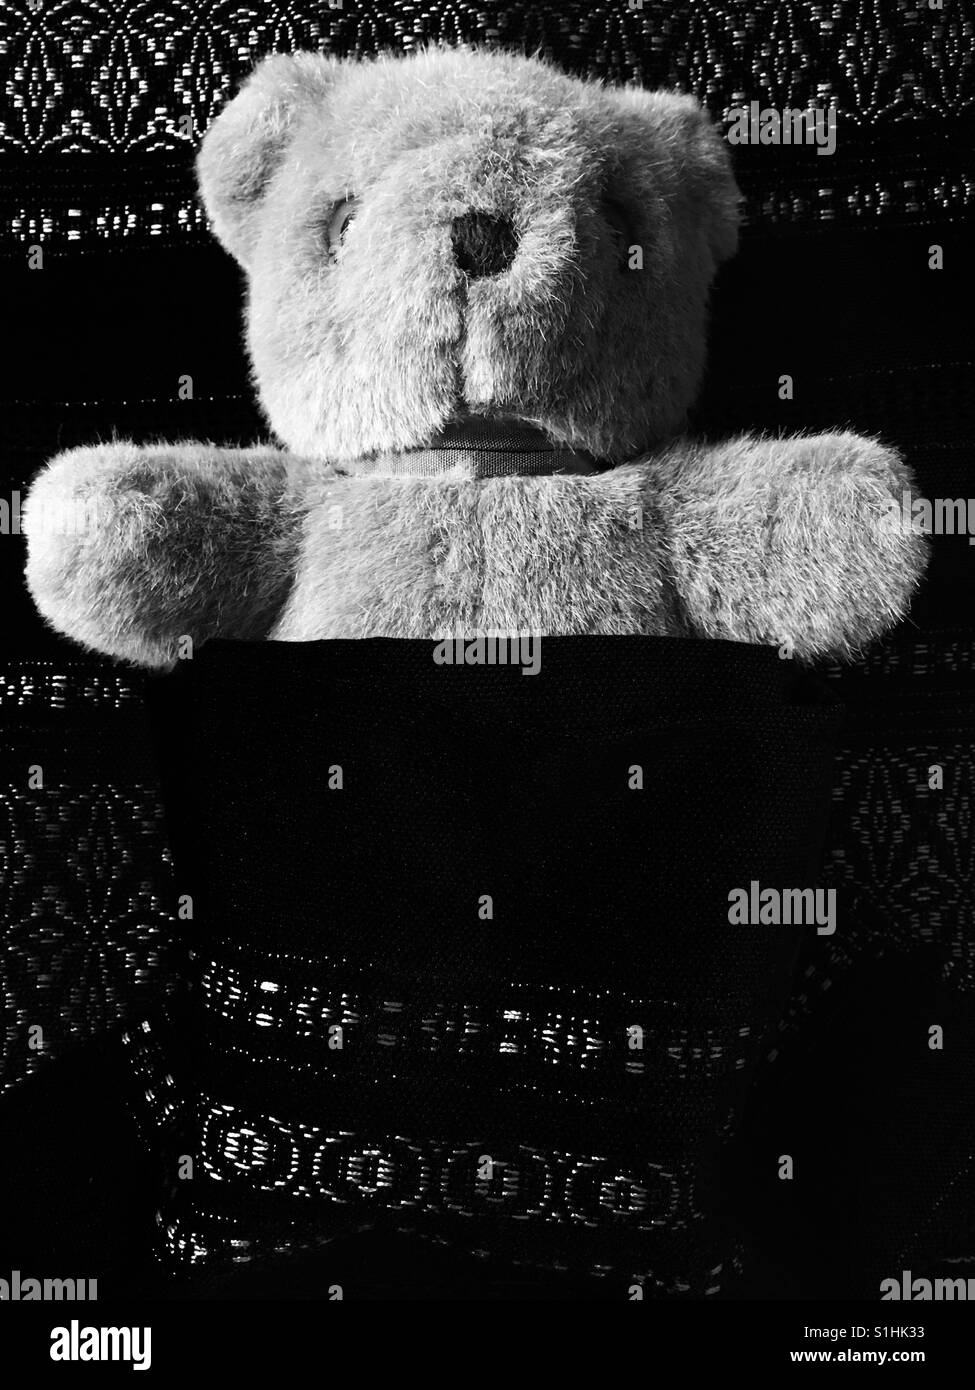 Teddy bear tucked in black and white Stock Photo